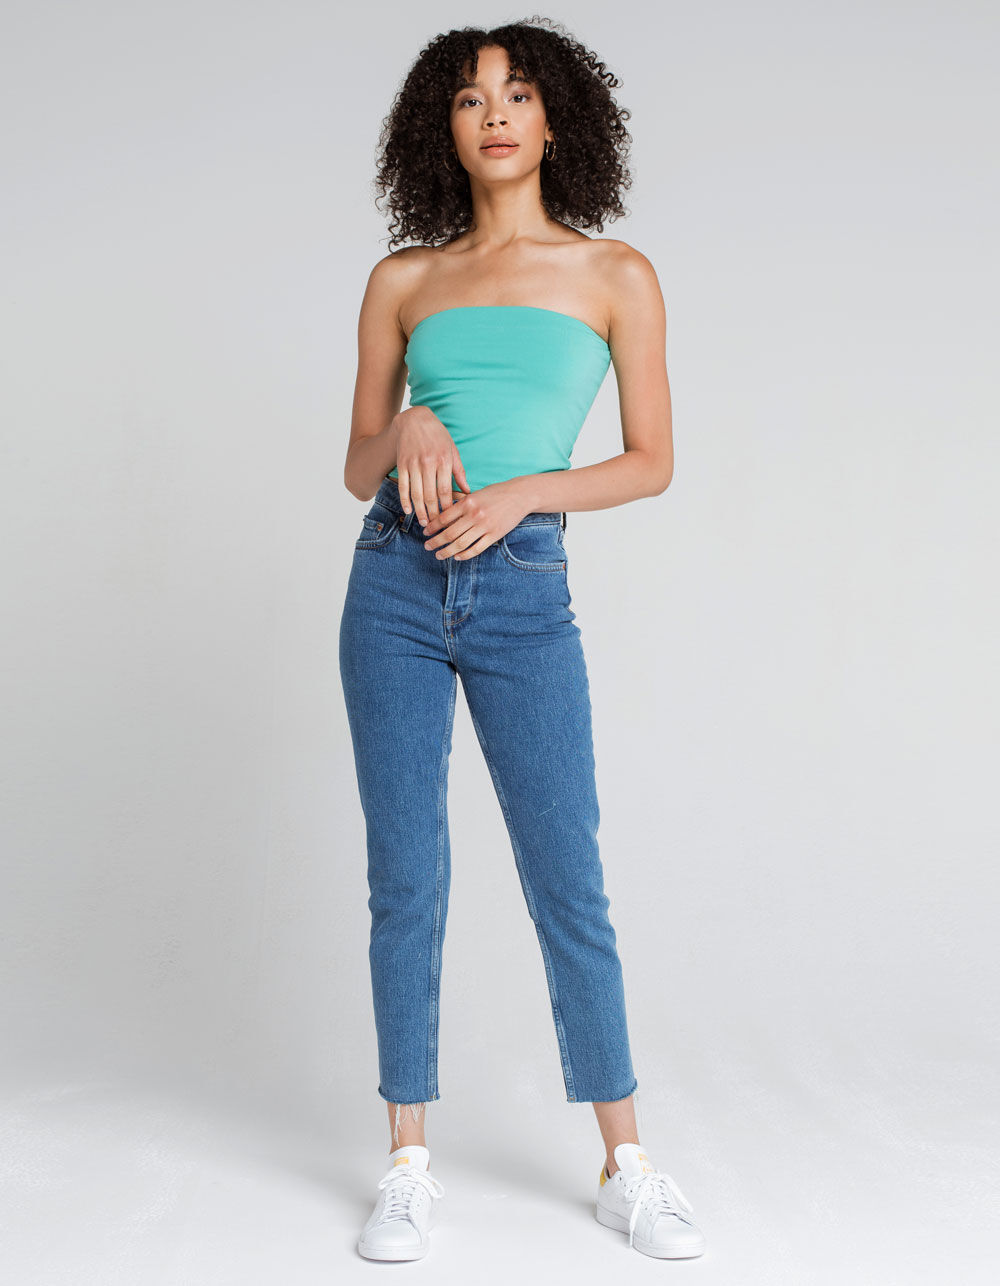 DESTINED Womens Teal Green Tube Top